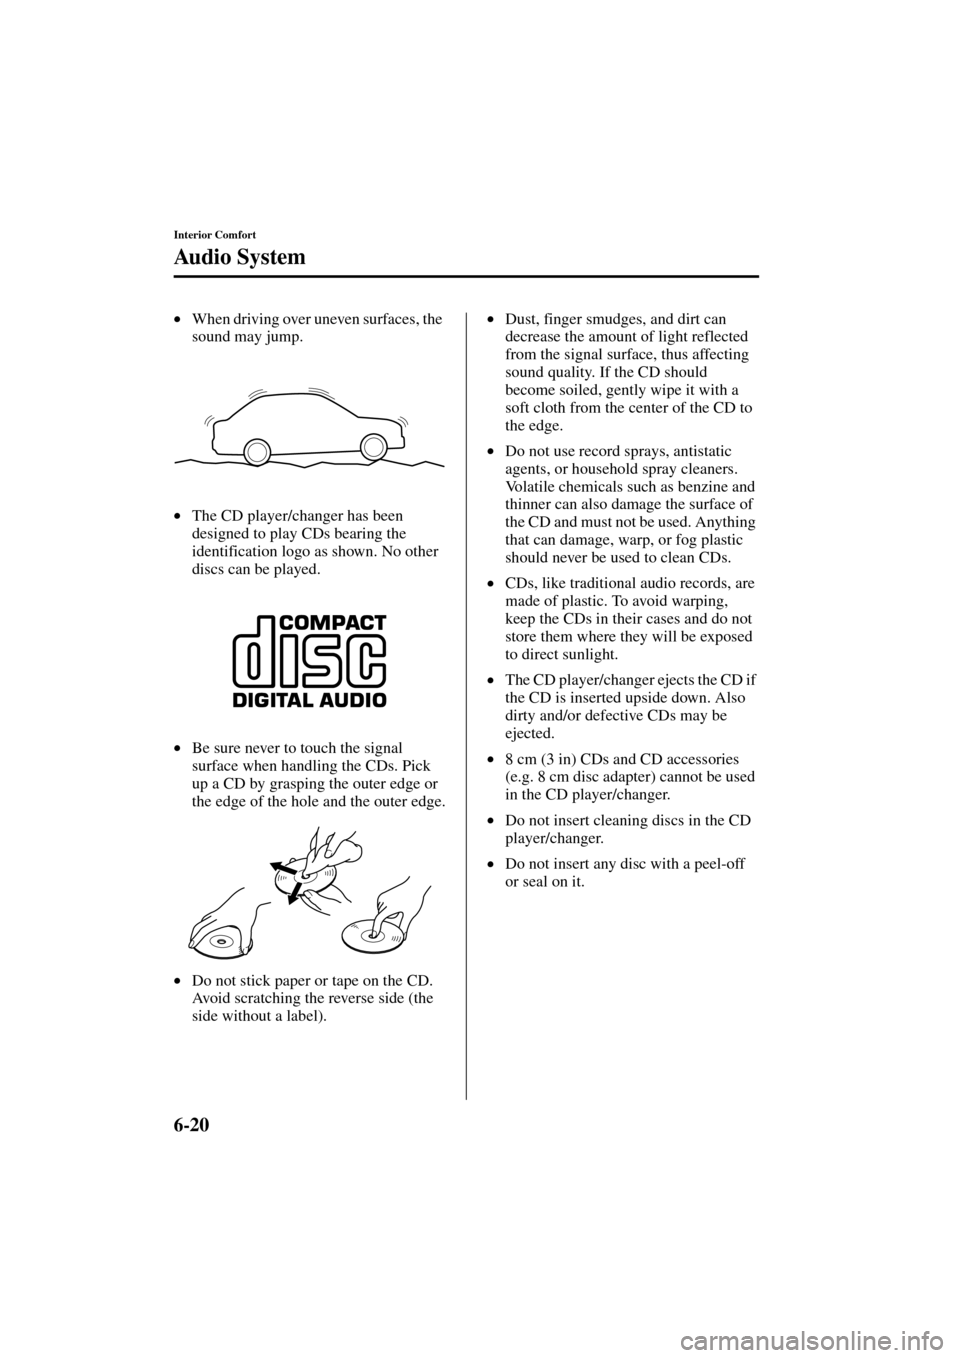 MAZDA MODEL MPV 2004  Owners Manual (in English) 6-20
Interior Comfort
Au di o S ys t em
Form No. 8S06-EA-03H
•When driving over uneven surfaces, the 
sound may jump.
•The CD player/changer has been 
designed to play CDs bearing the 
identificat